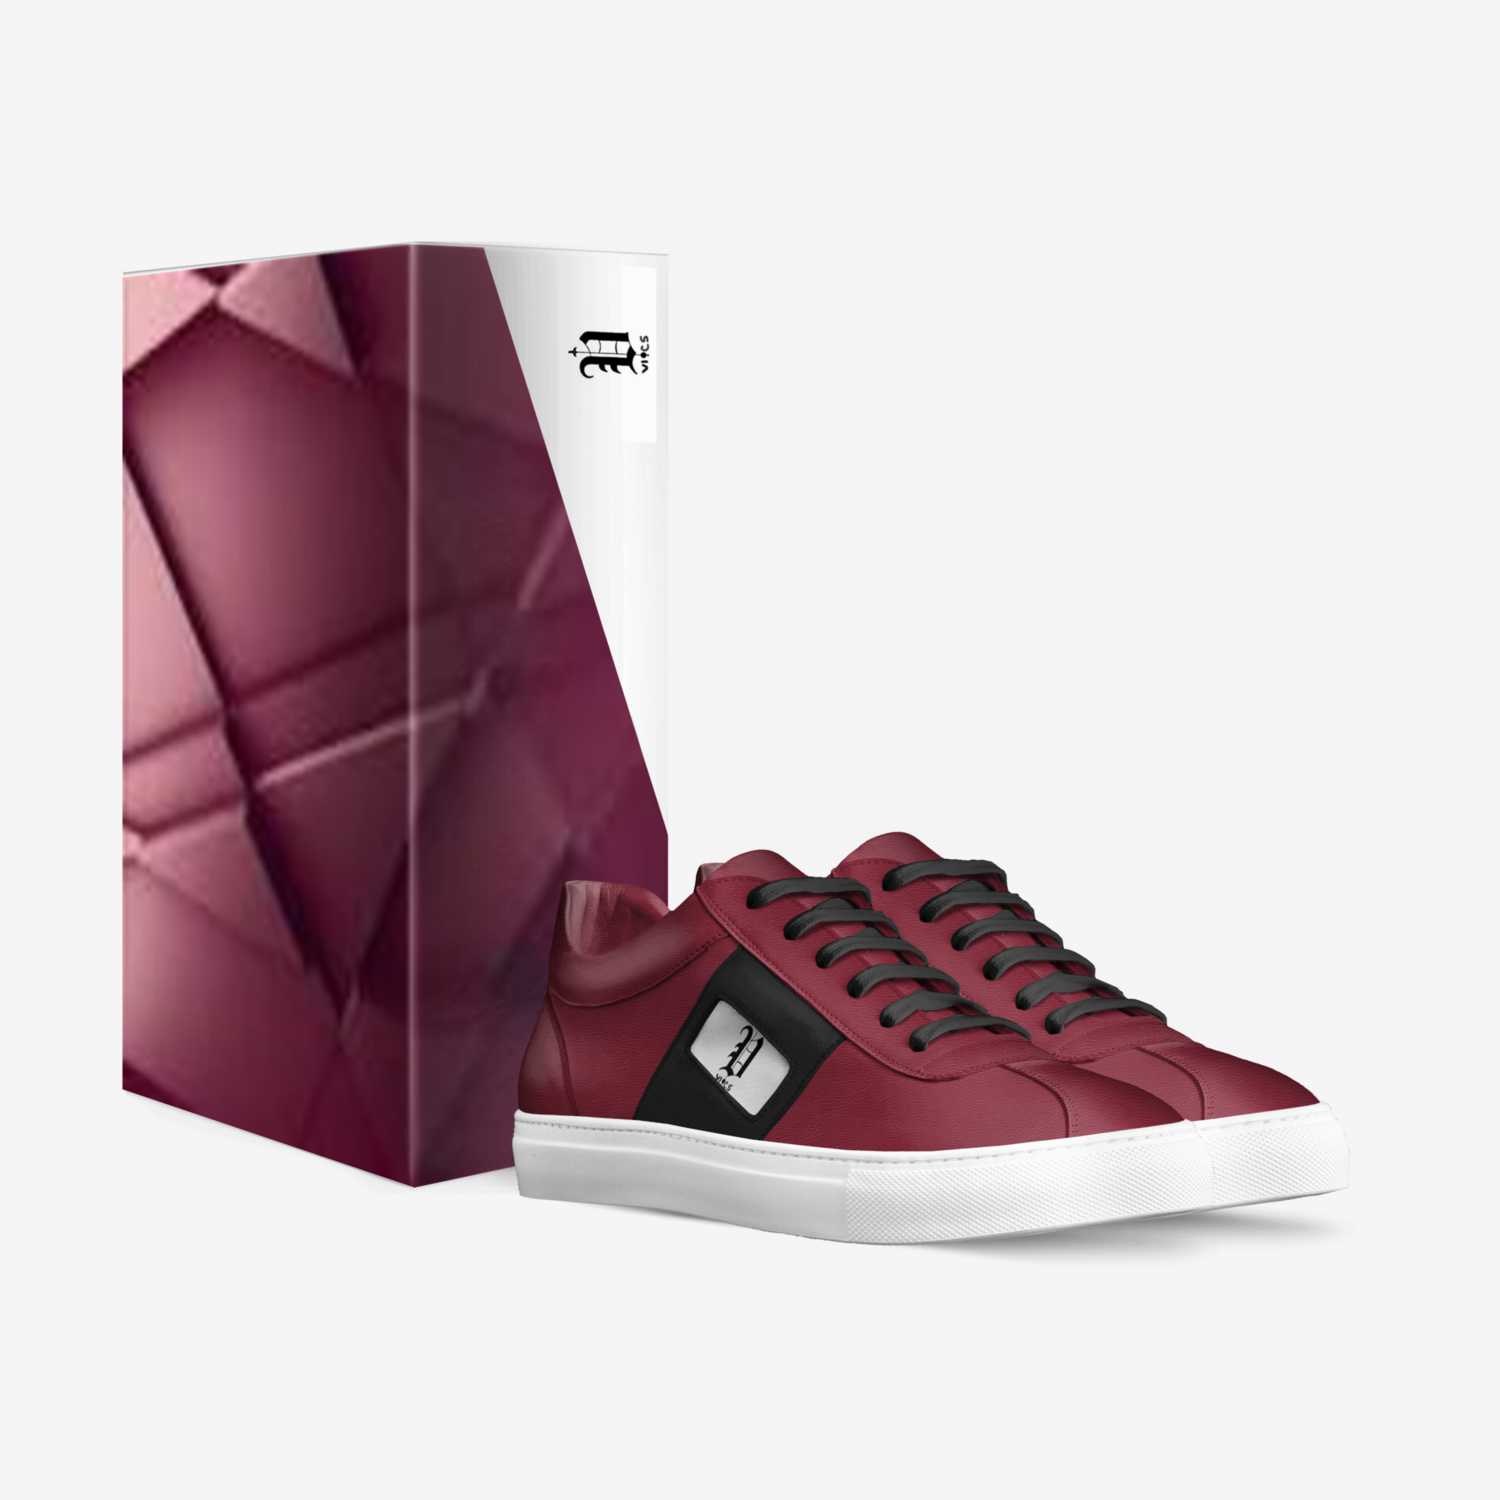 Vics maroon custom made in Italy shoes by Brayden Murphy | Box view